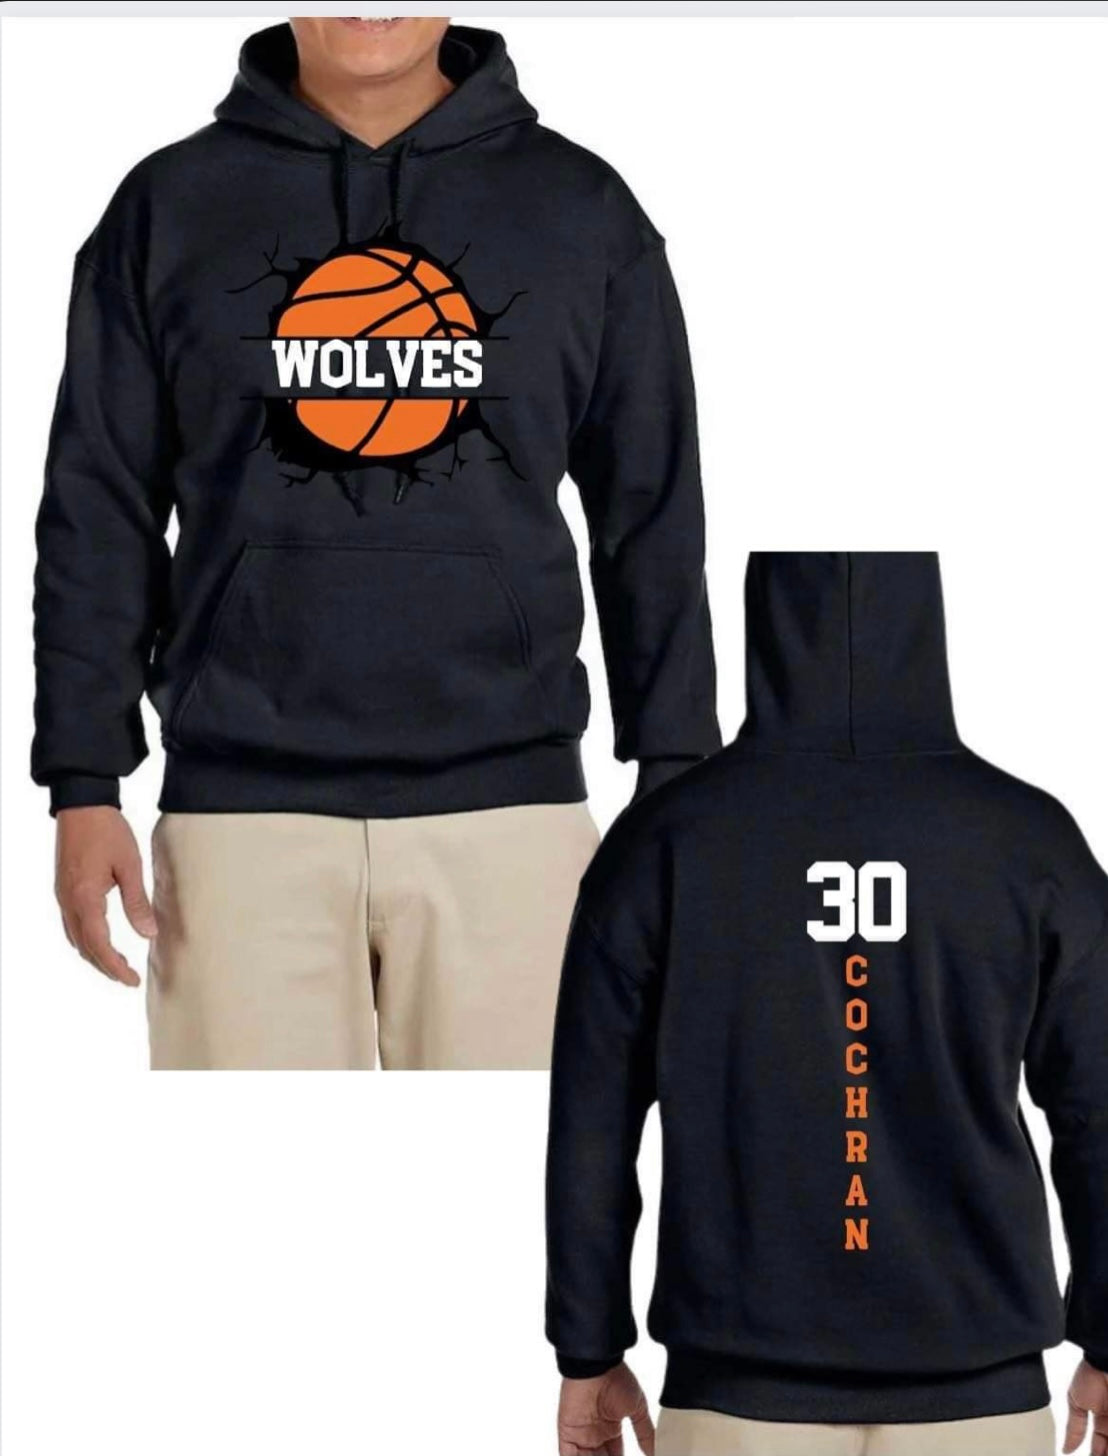 Wolves Dry Fit Basketball Hoodie